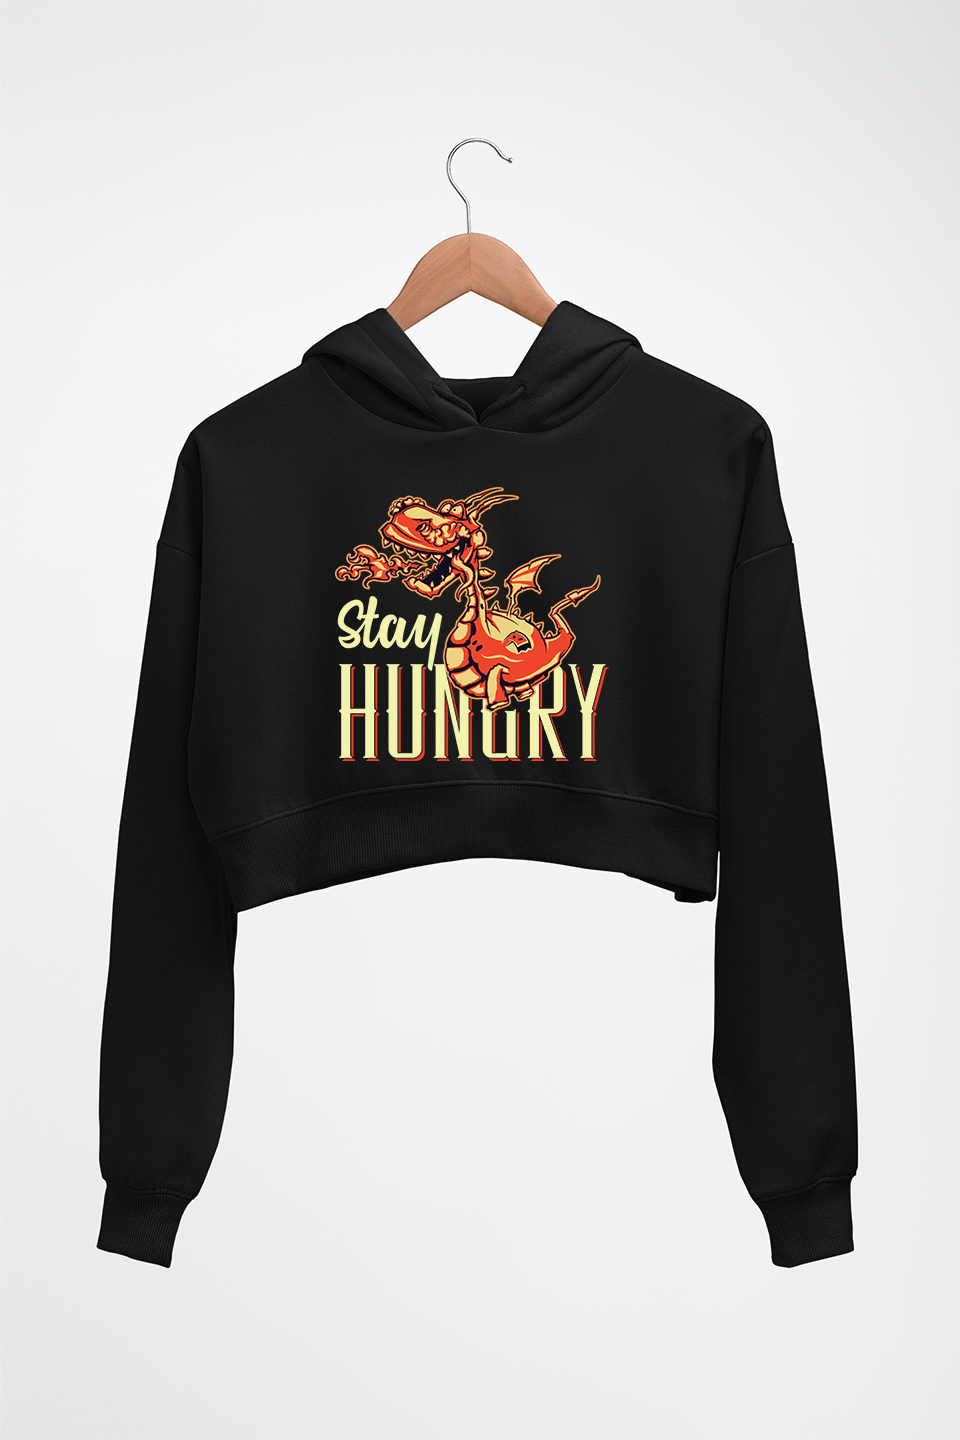 Hungry Dragon Crop HOODIE FOR WOMEN